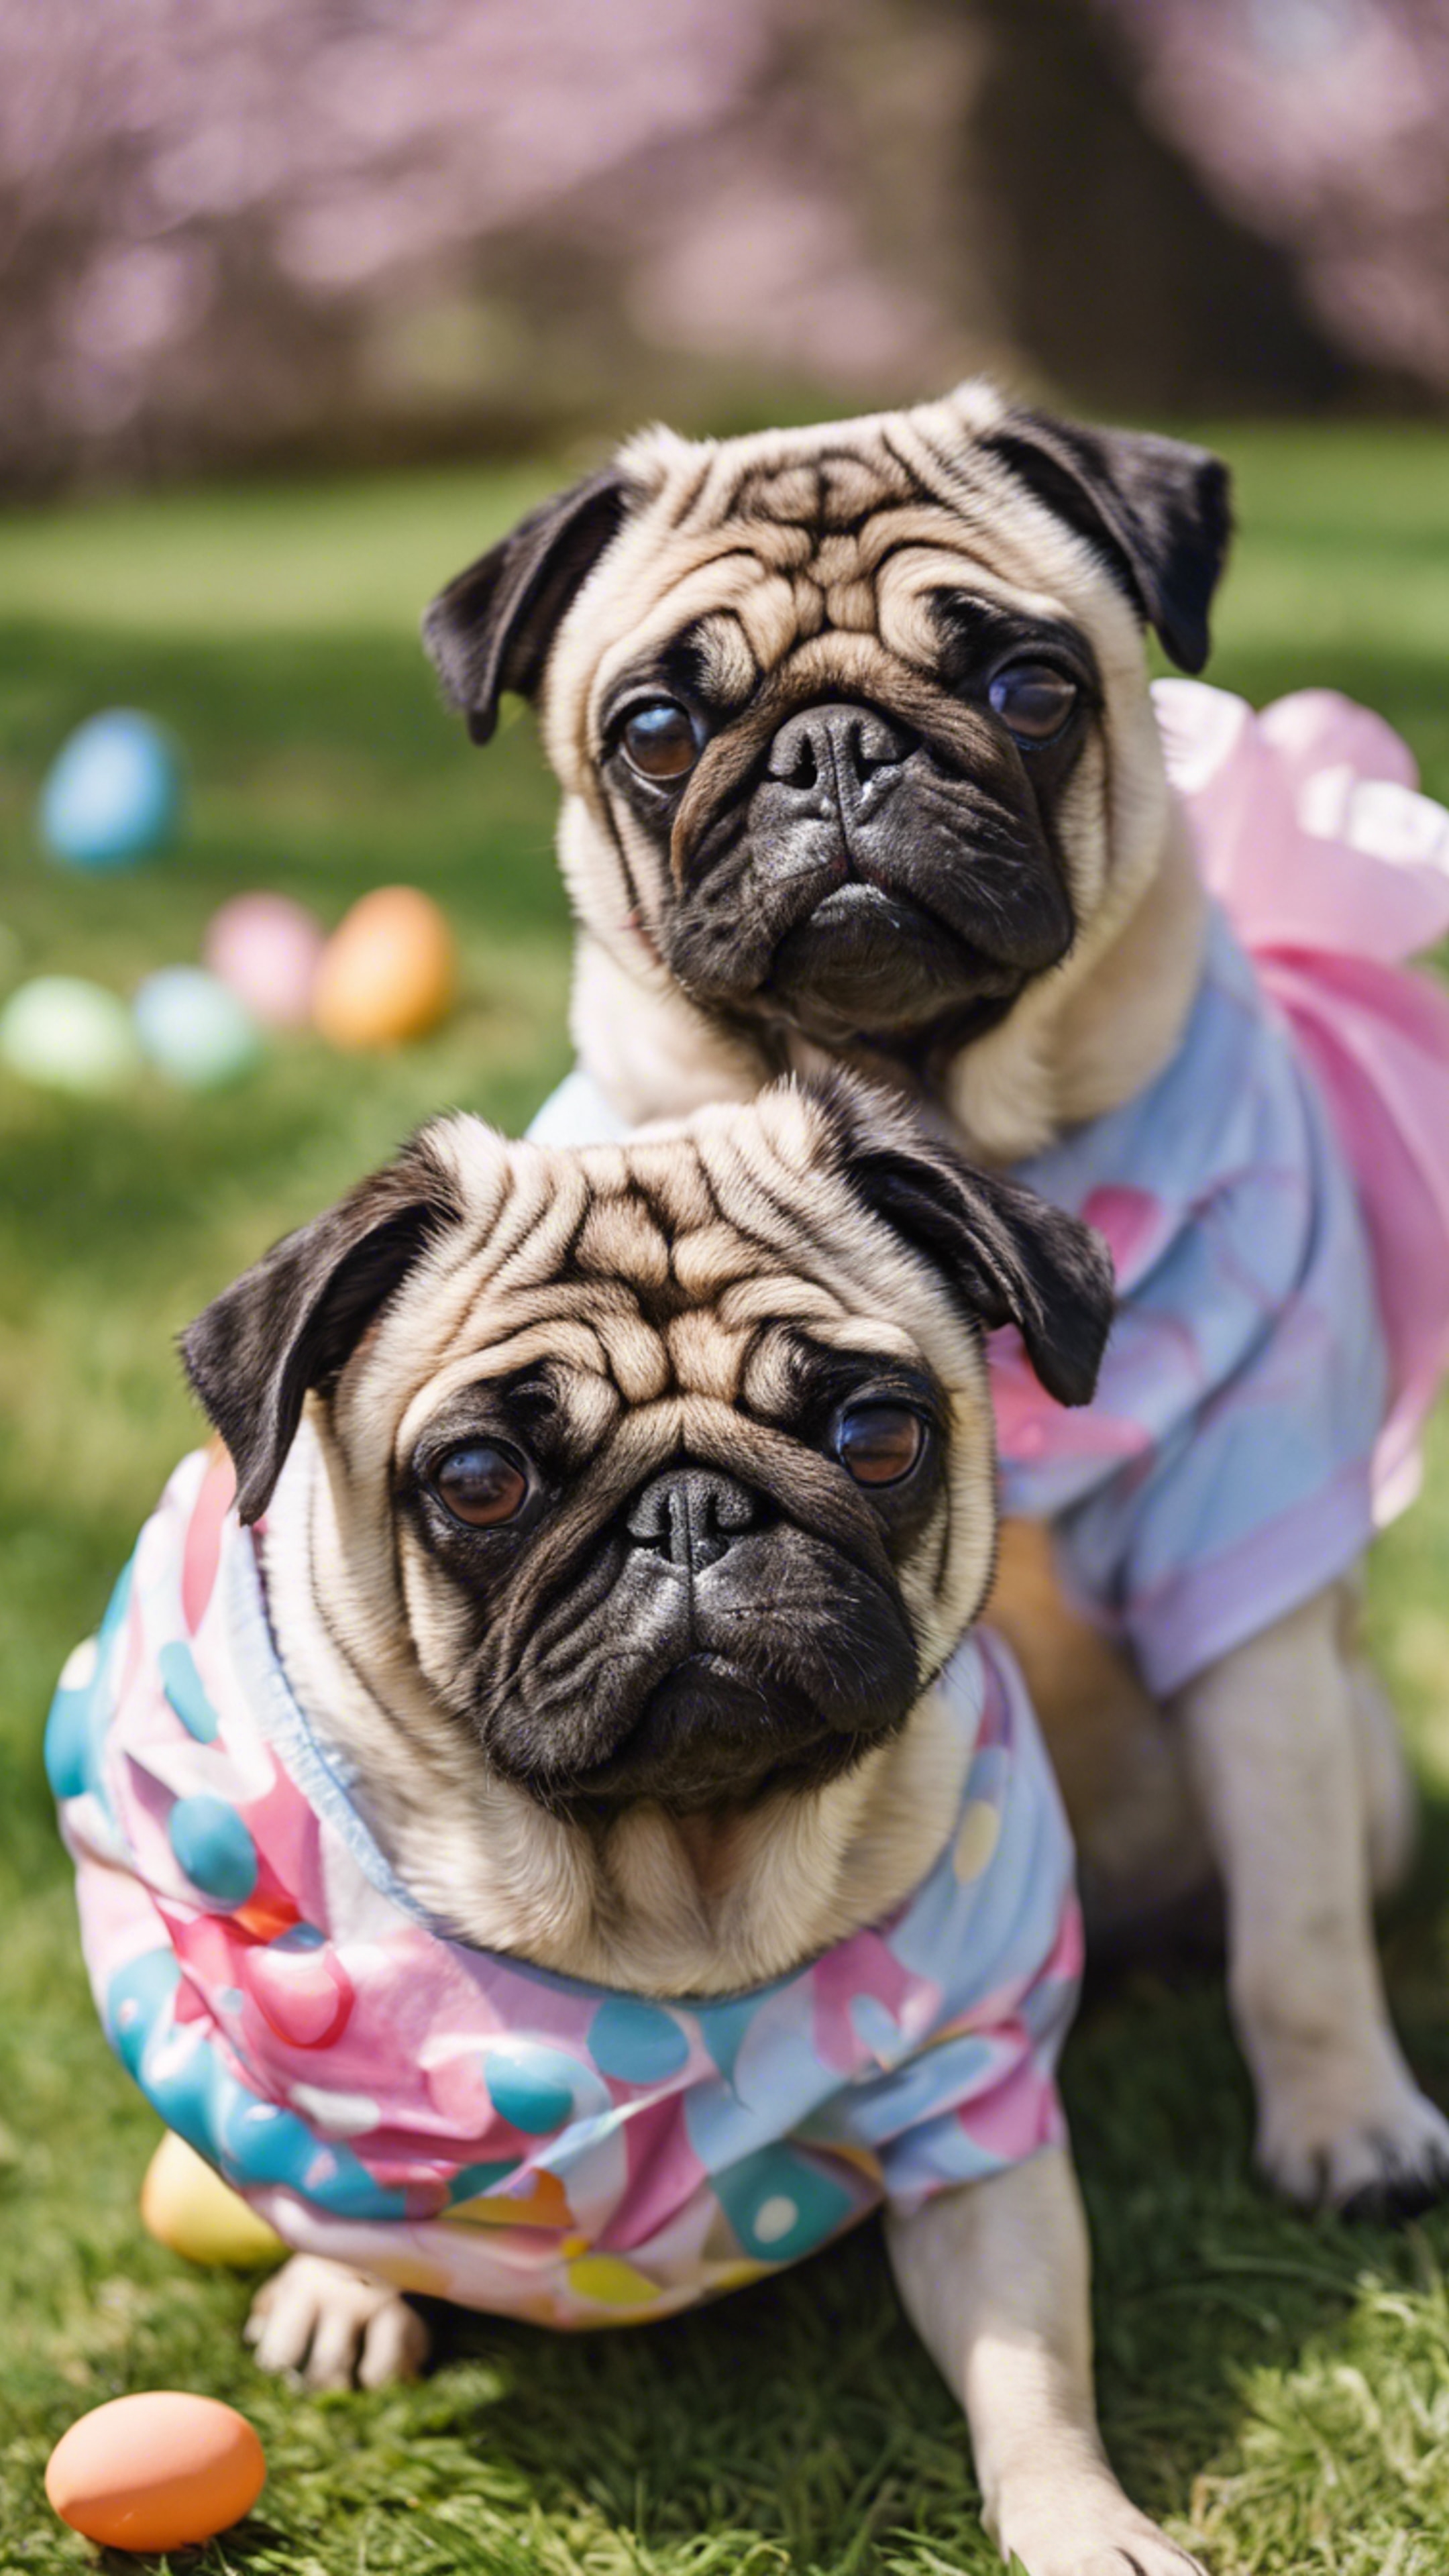 Whimsically dressed pugs participating in a local doggy Easter egg roll.壁紙[f2a3294fad0948aabbc9]